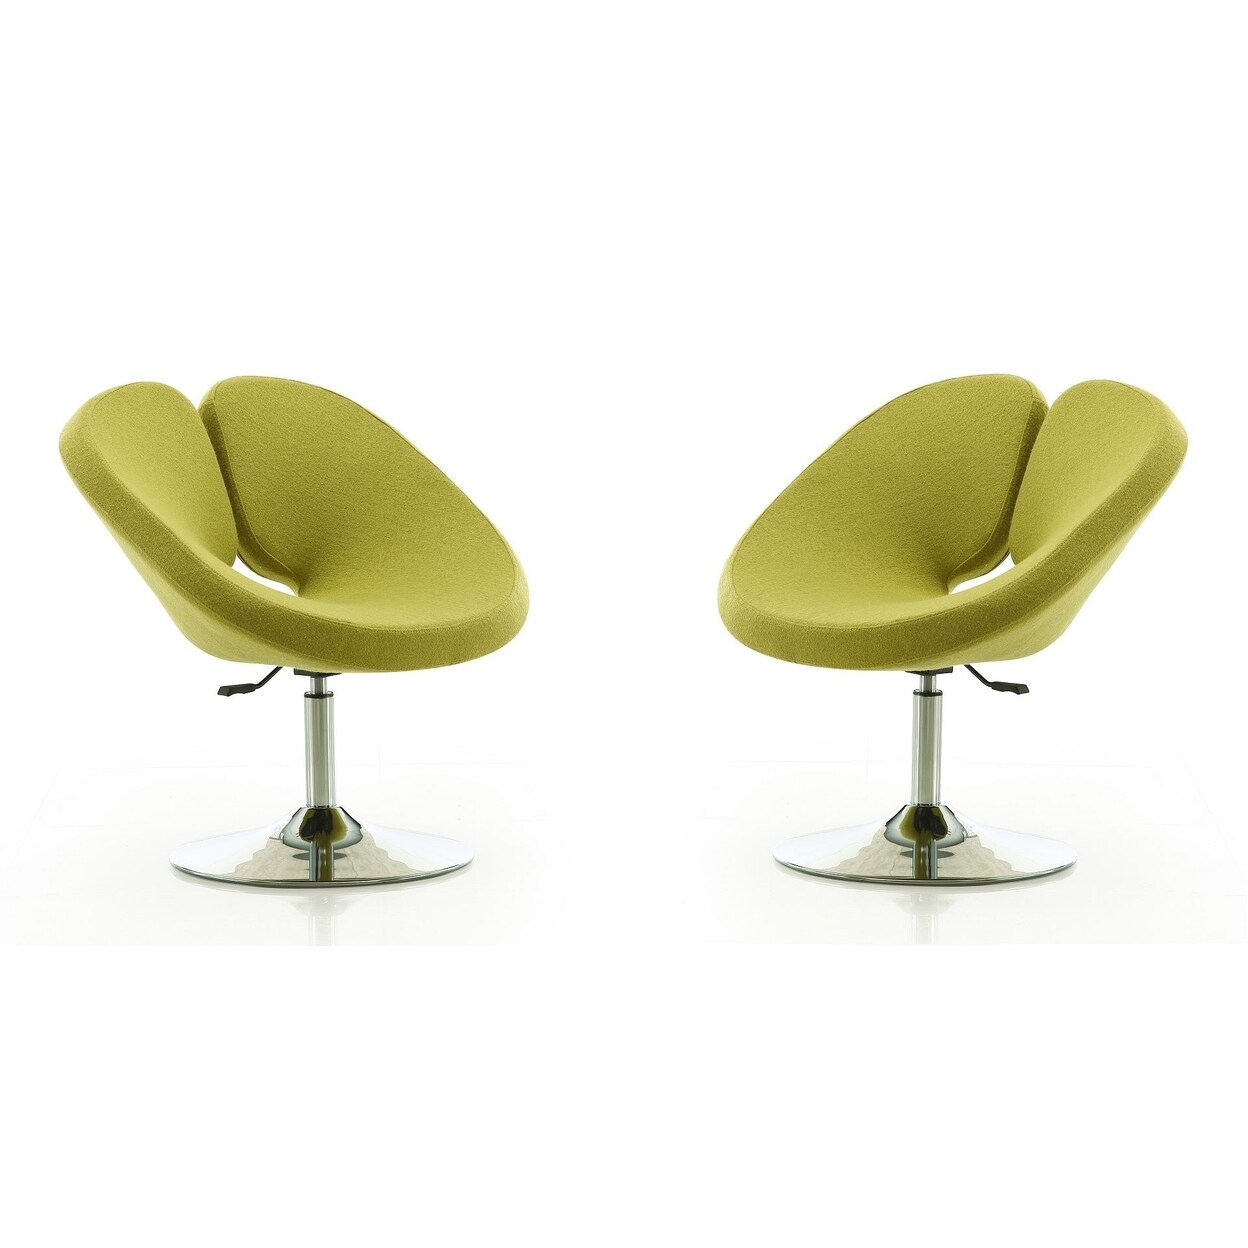 Manhattan Comfort Perch Green and Polished Chrome Wool Blend Adjustable Chair (Set of 2)